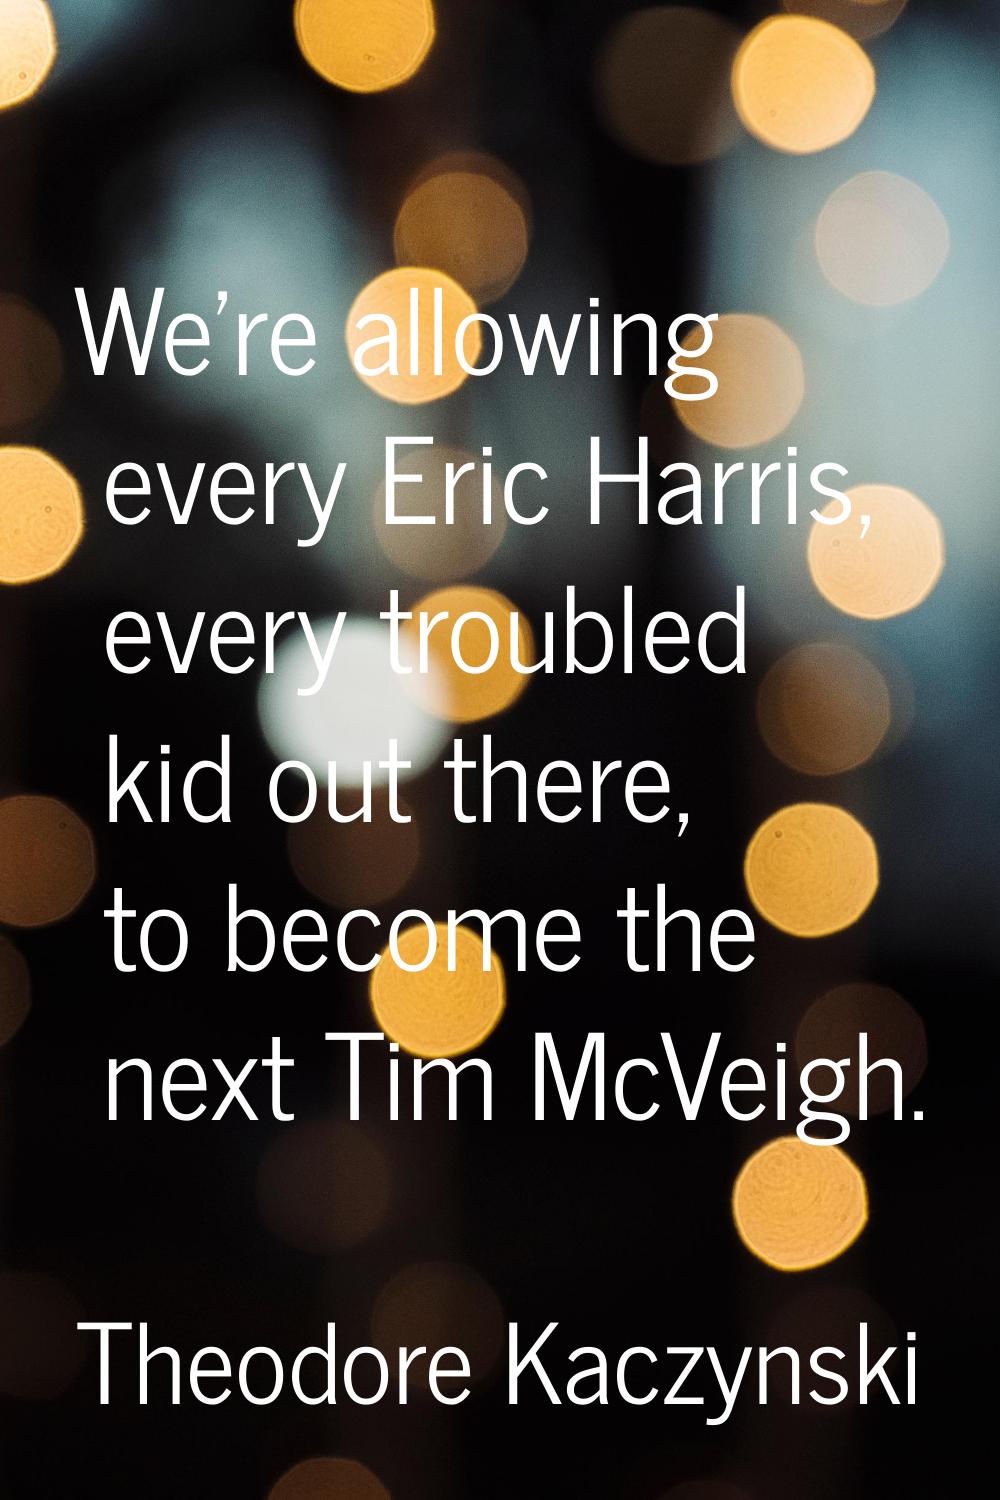 We're allowing every Eric Harris, every troubled kid out there, to become the next Tim McVeigh.